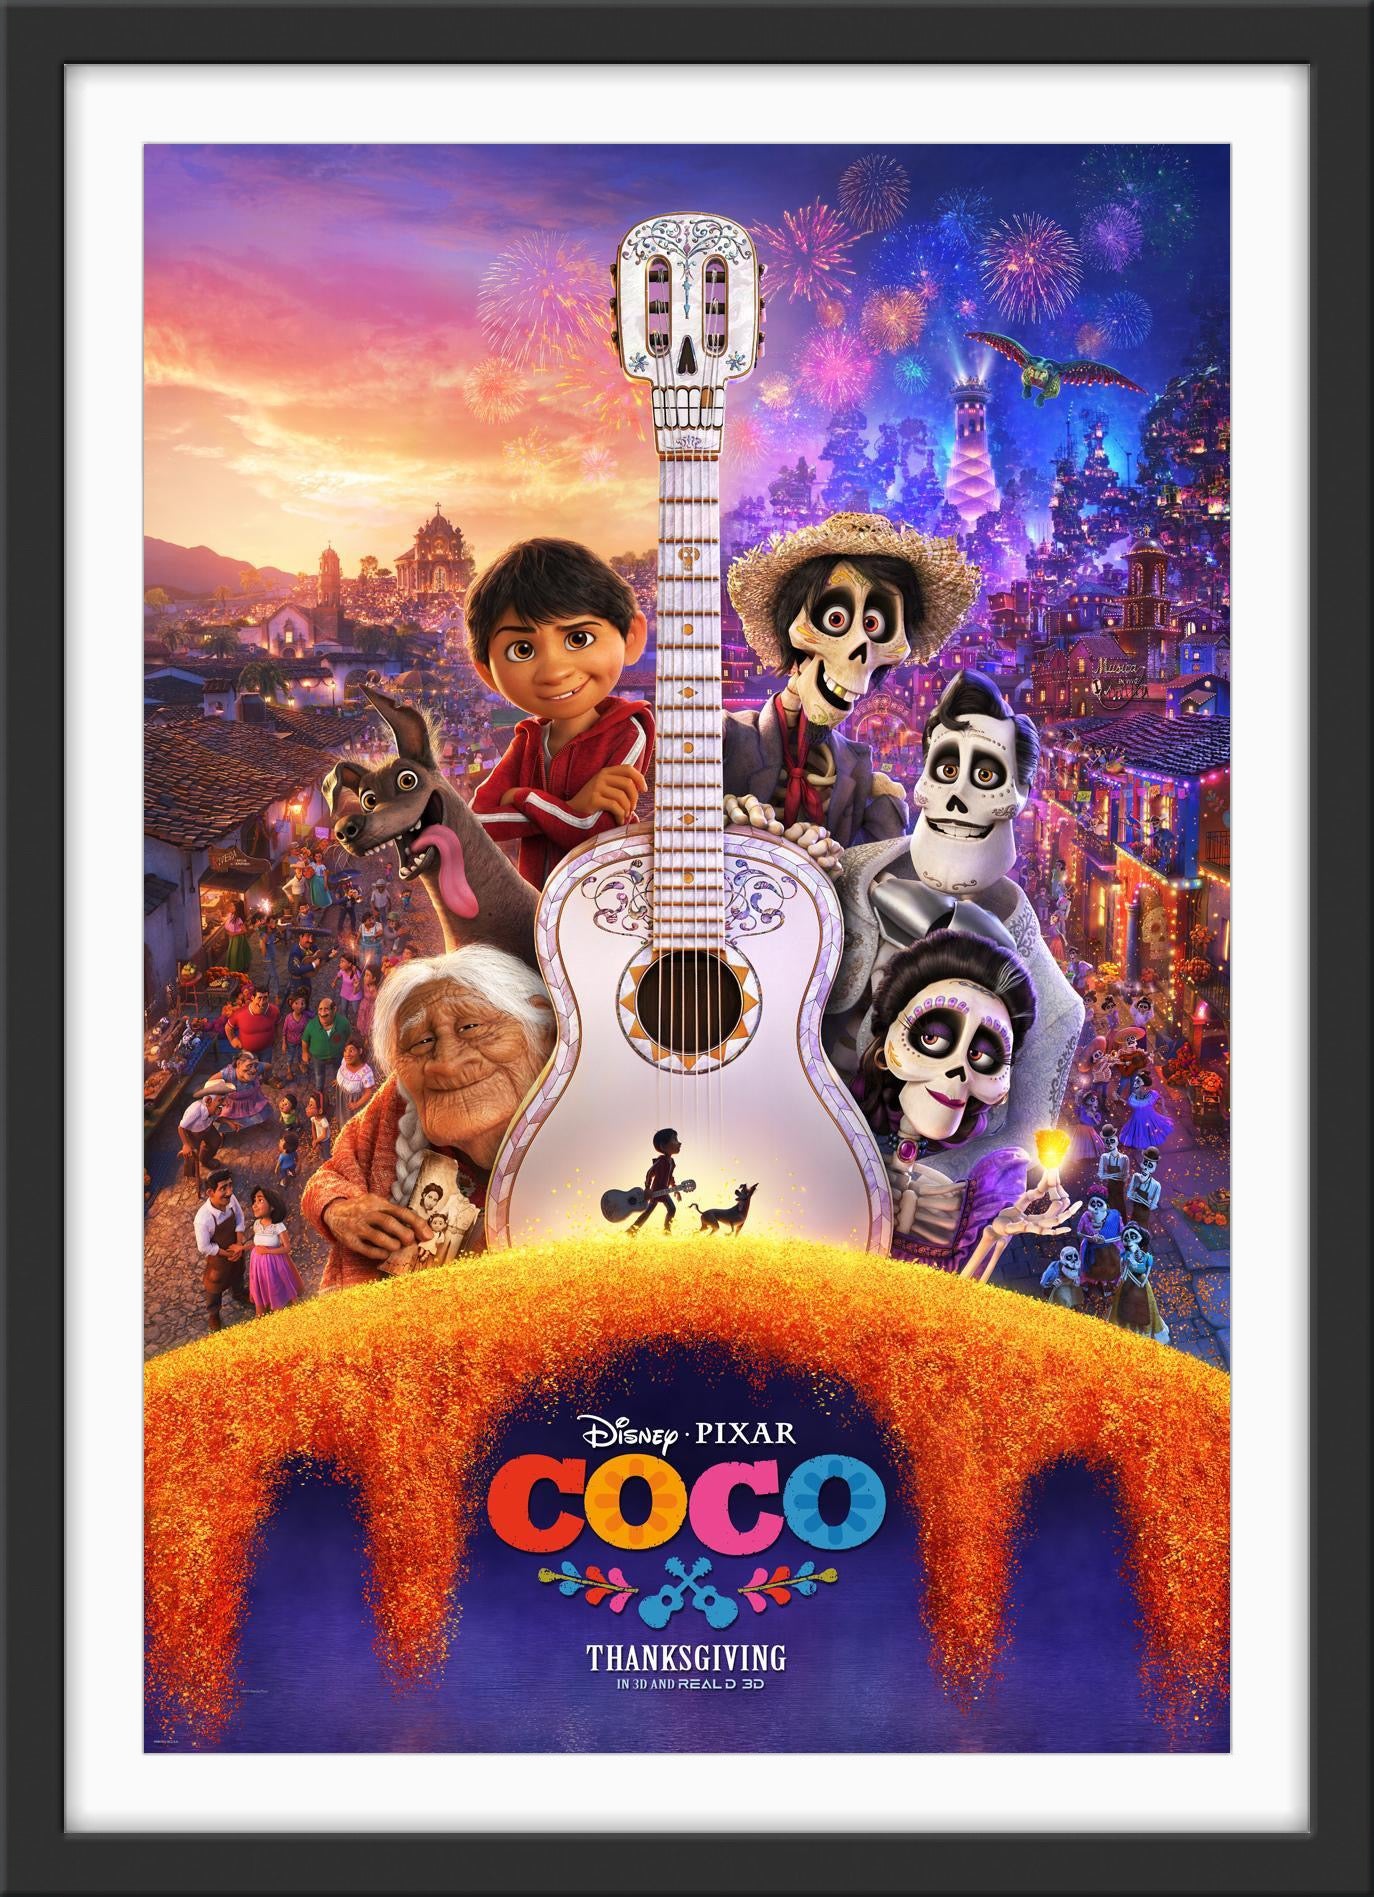 7 New Posters for Disney Pixar's Coco